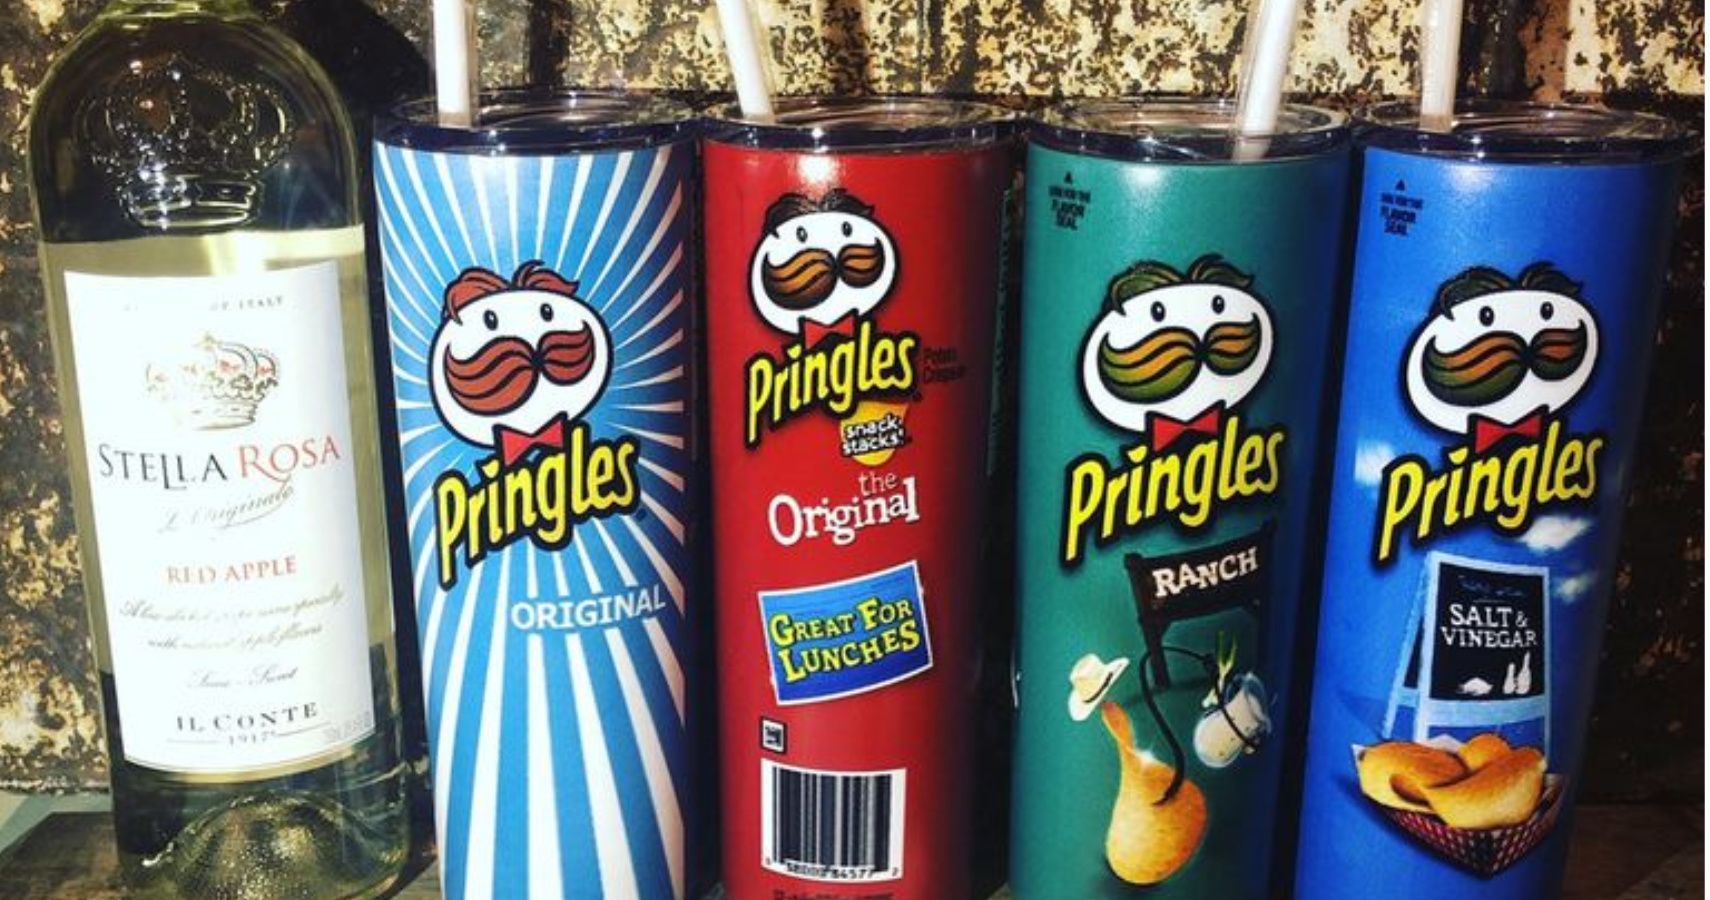 The Cup Artist pringles